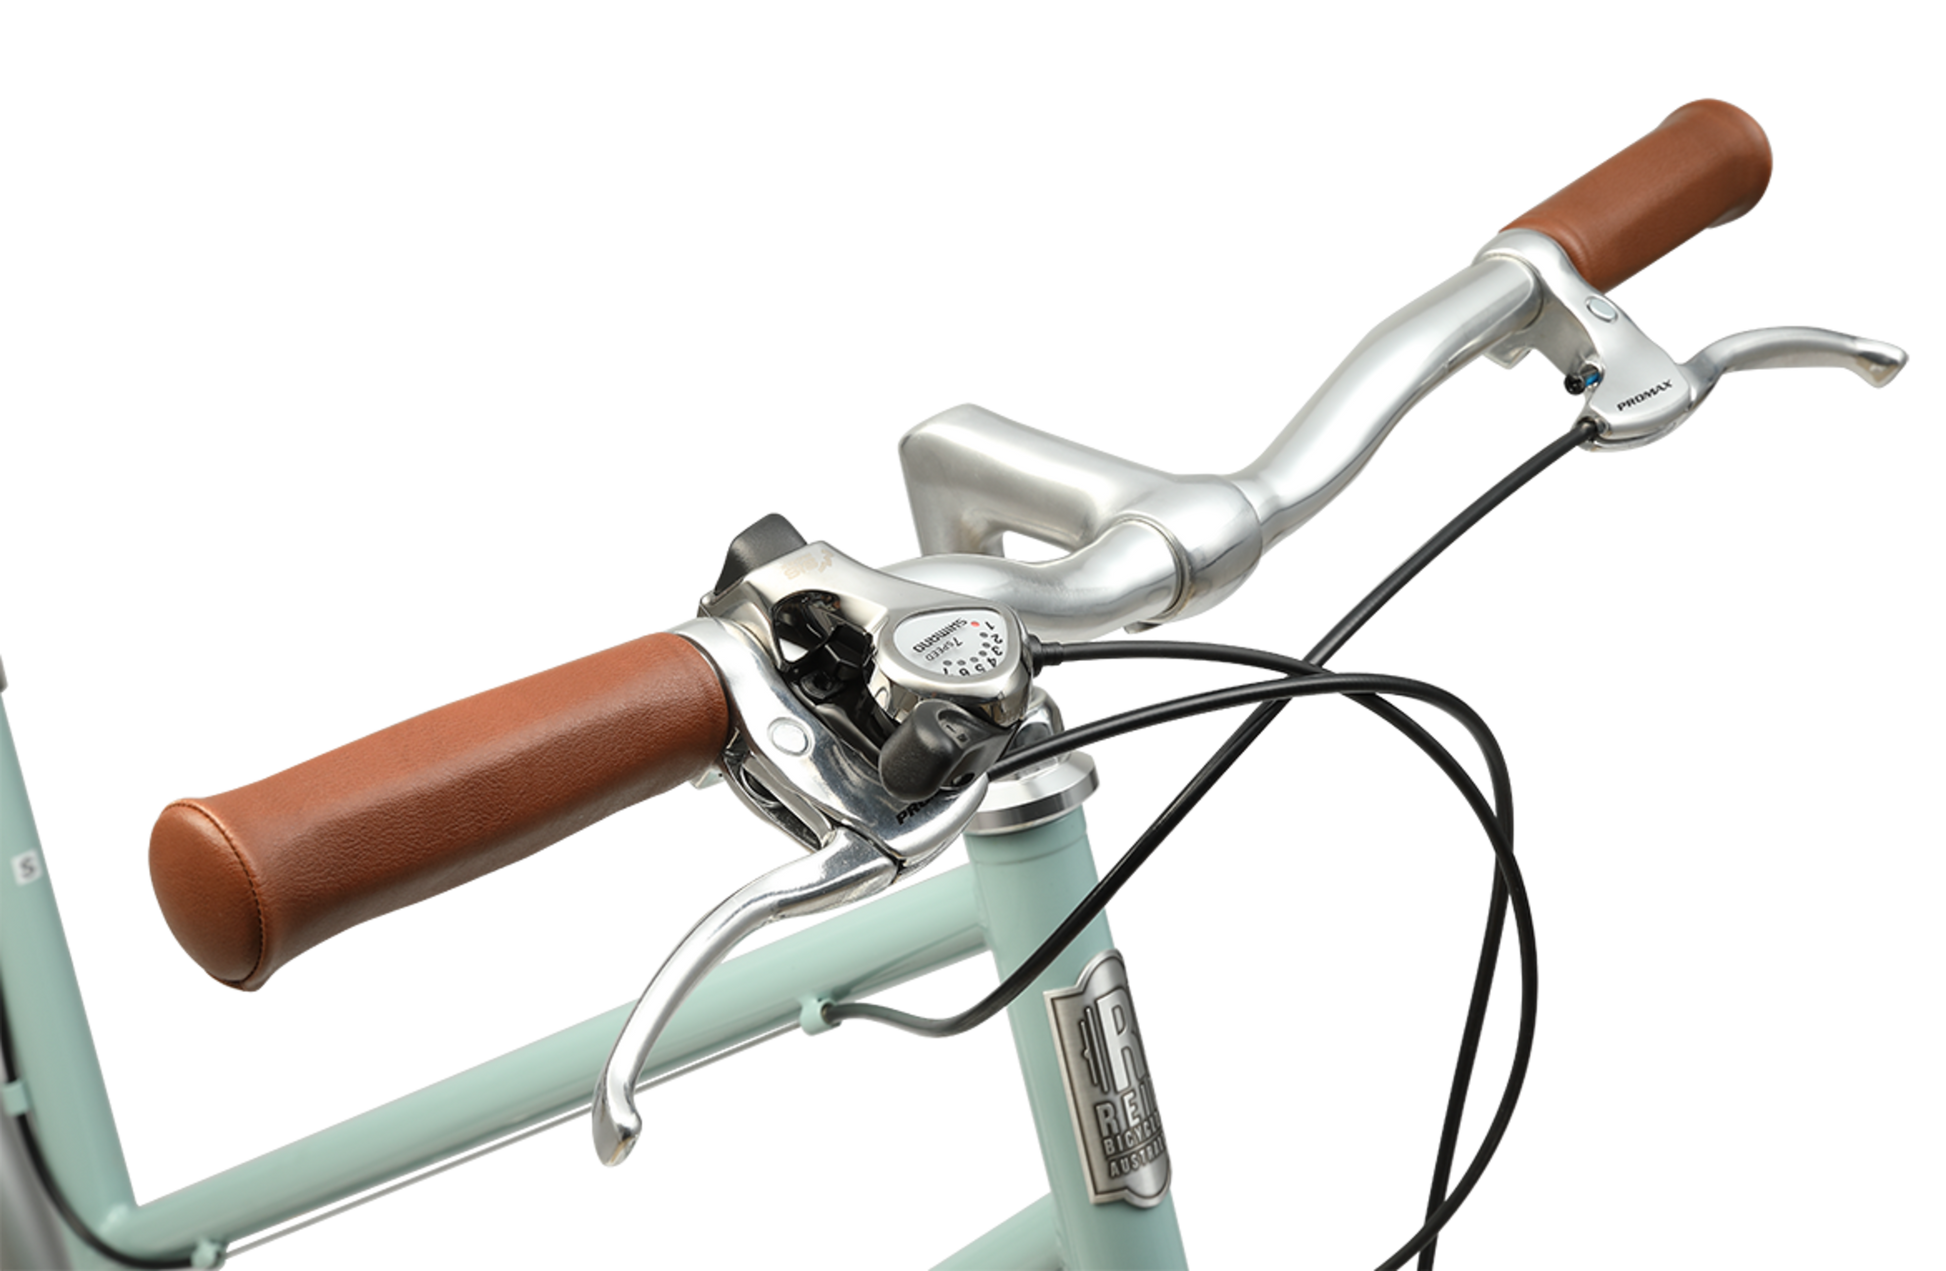 Ladies Esprit Vintage Bike in Sage showing vintage style handlebars and Shimano shifters from Reid Cycles Australia